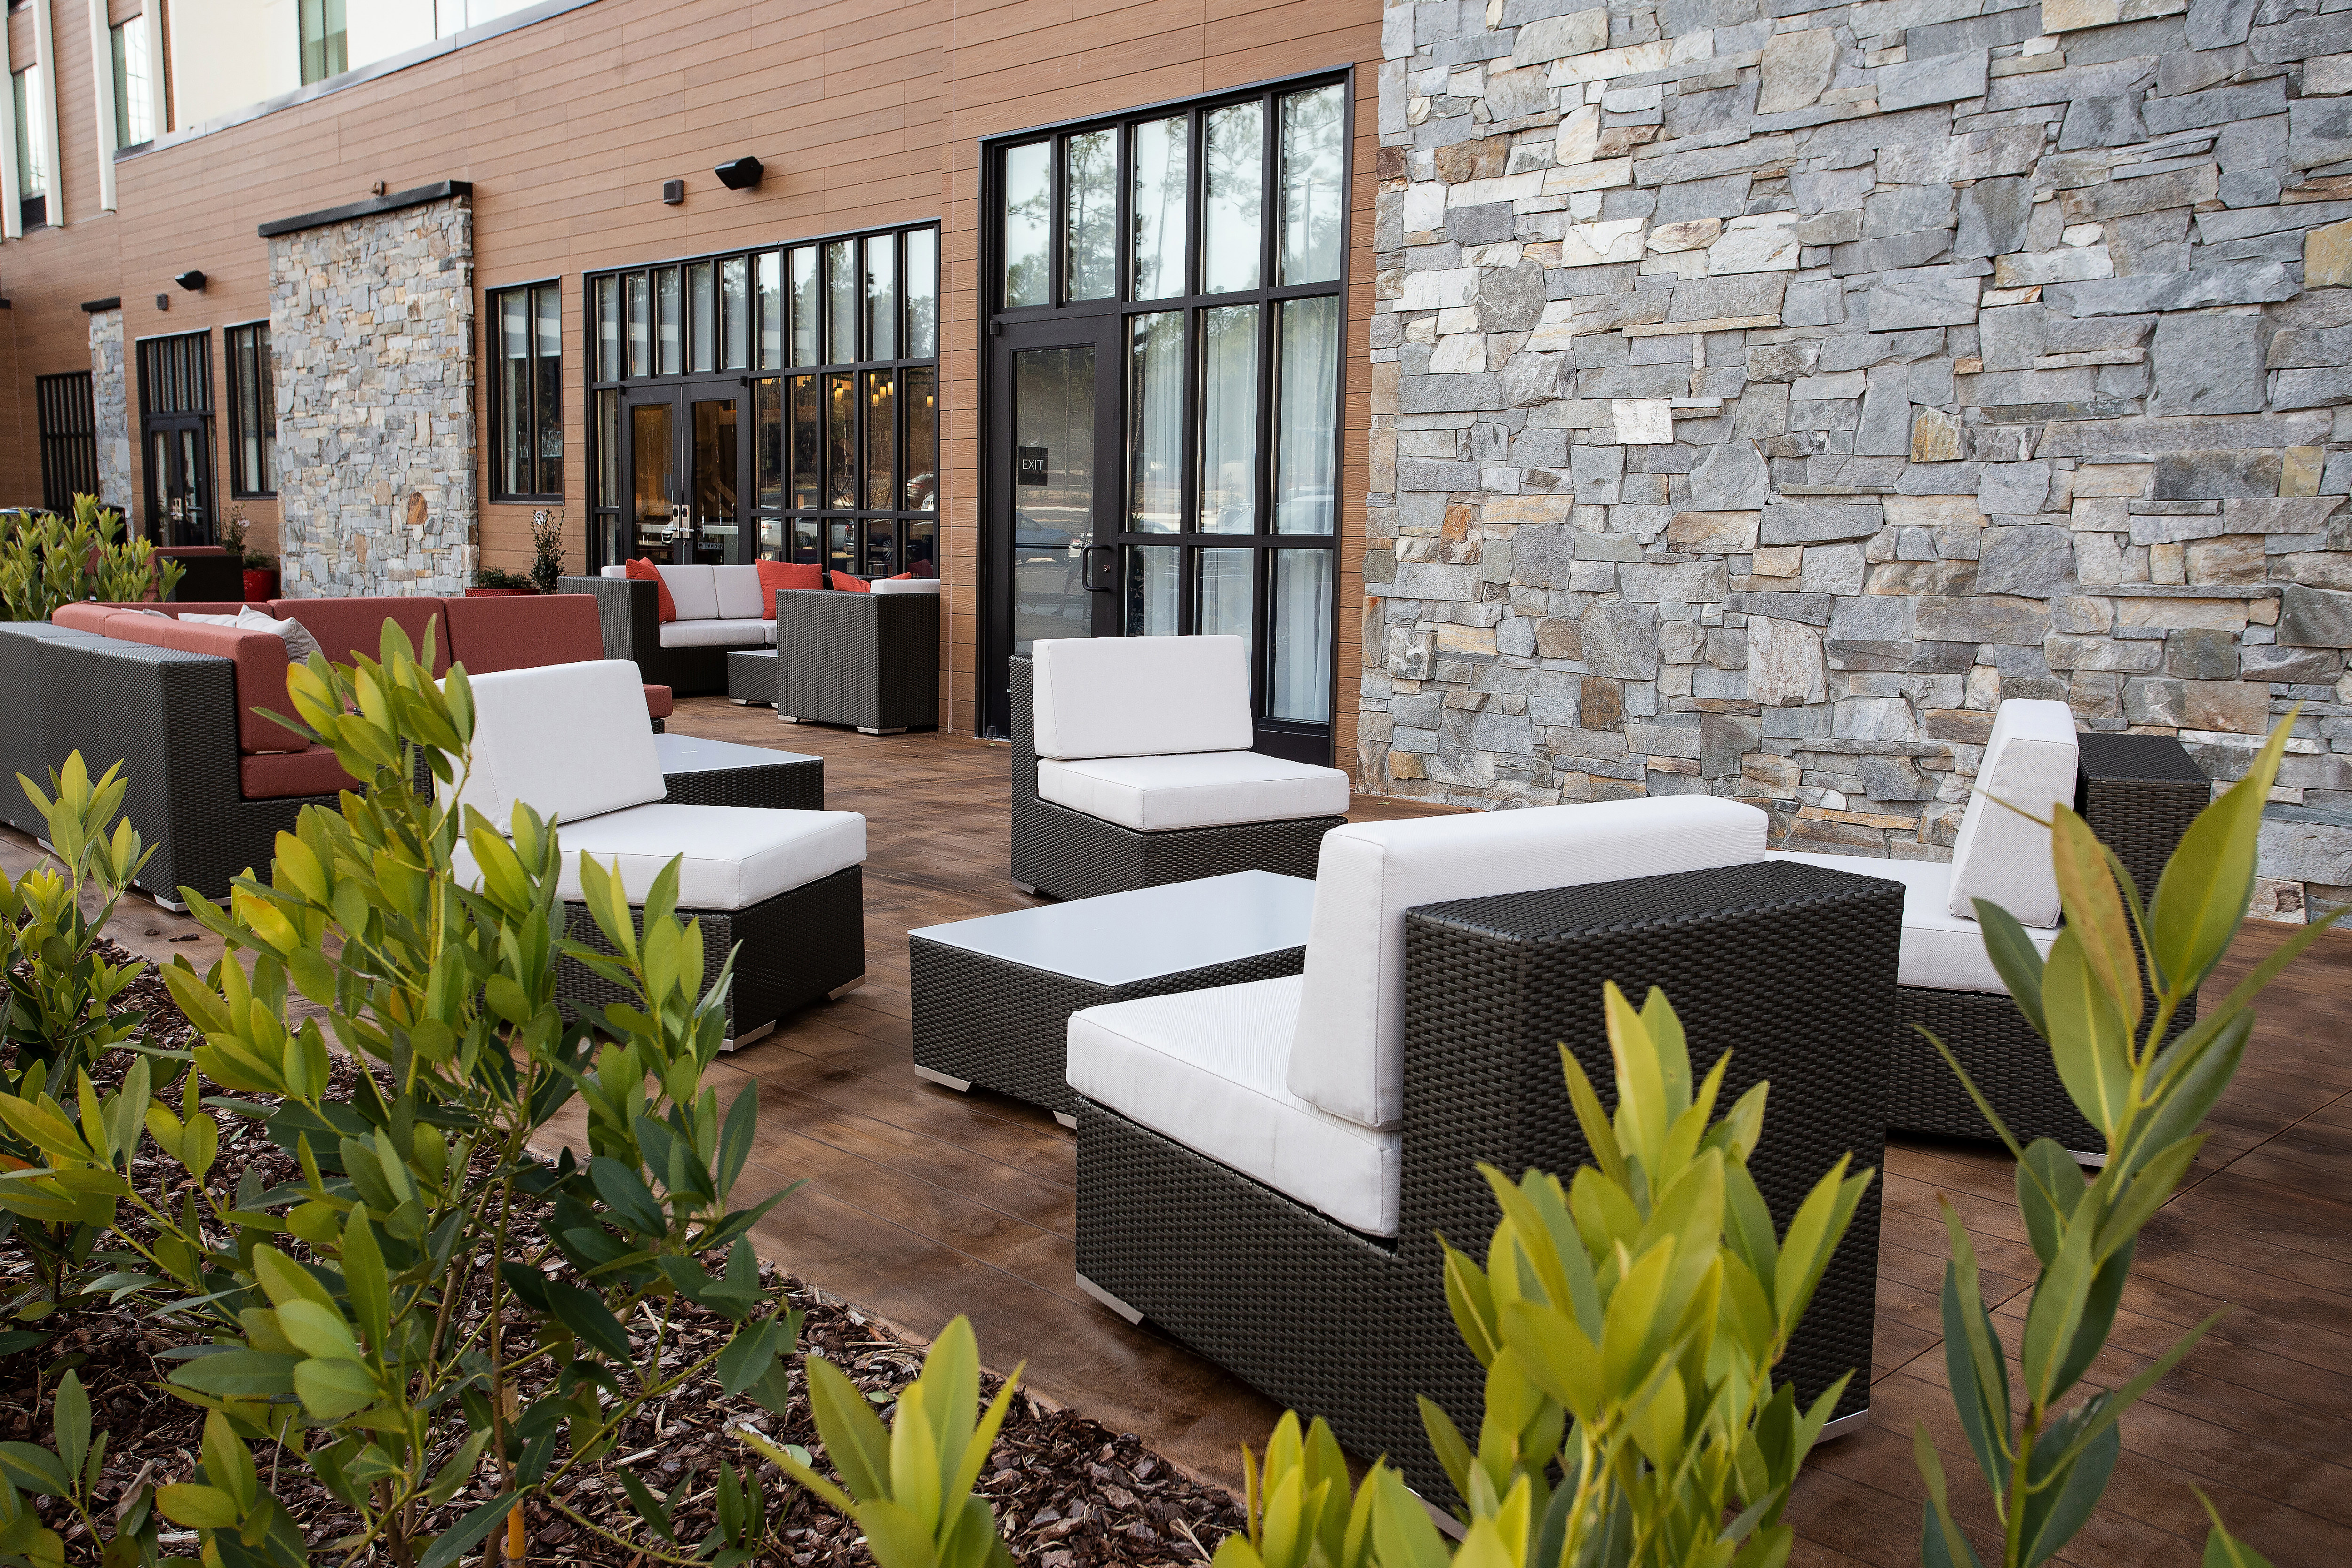 Oudoor Patio with Comfortable Seating Area